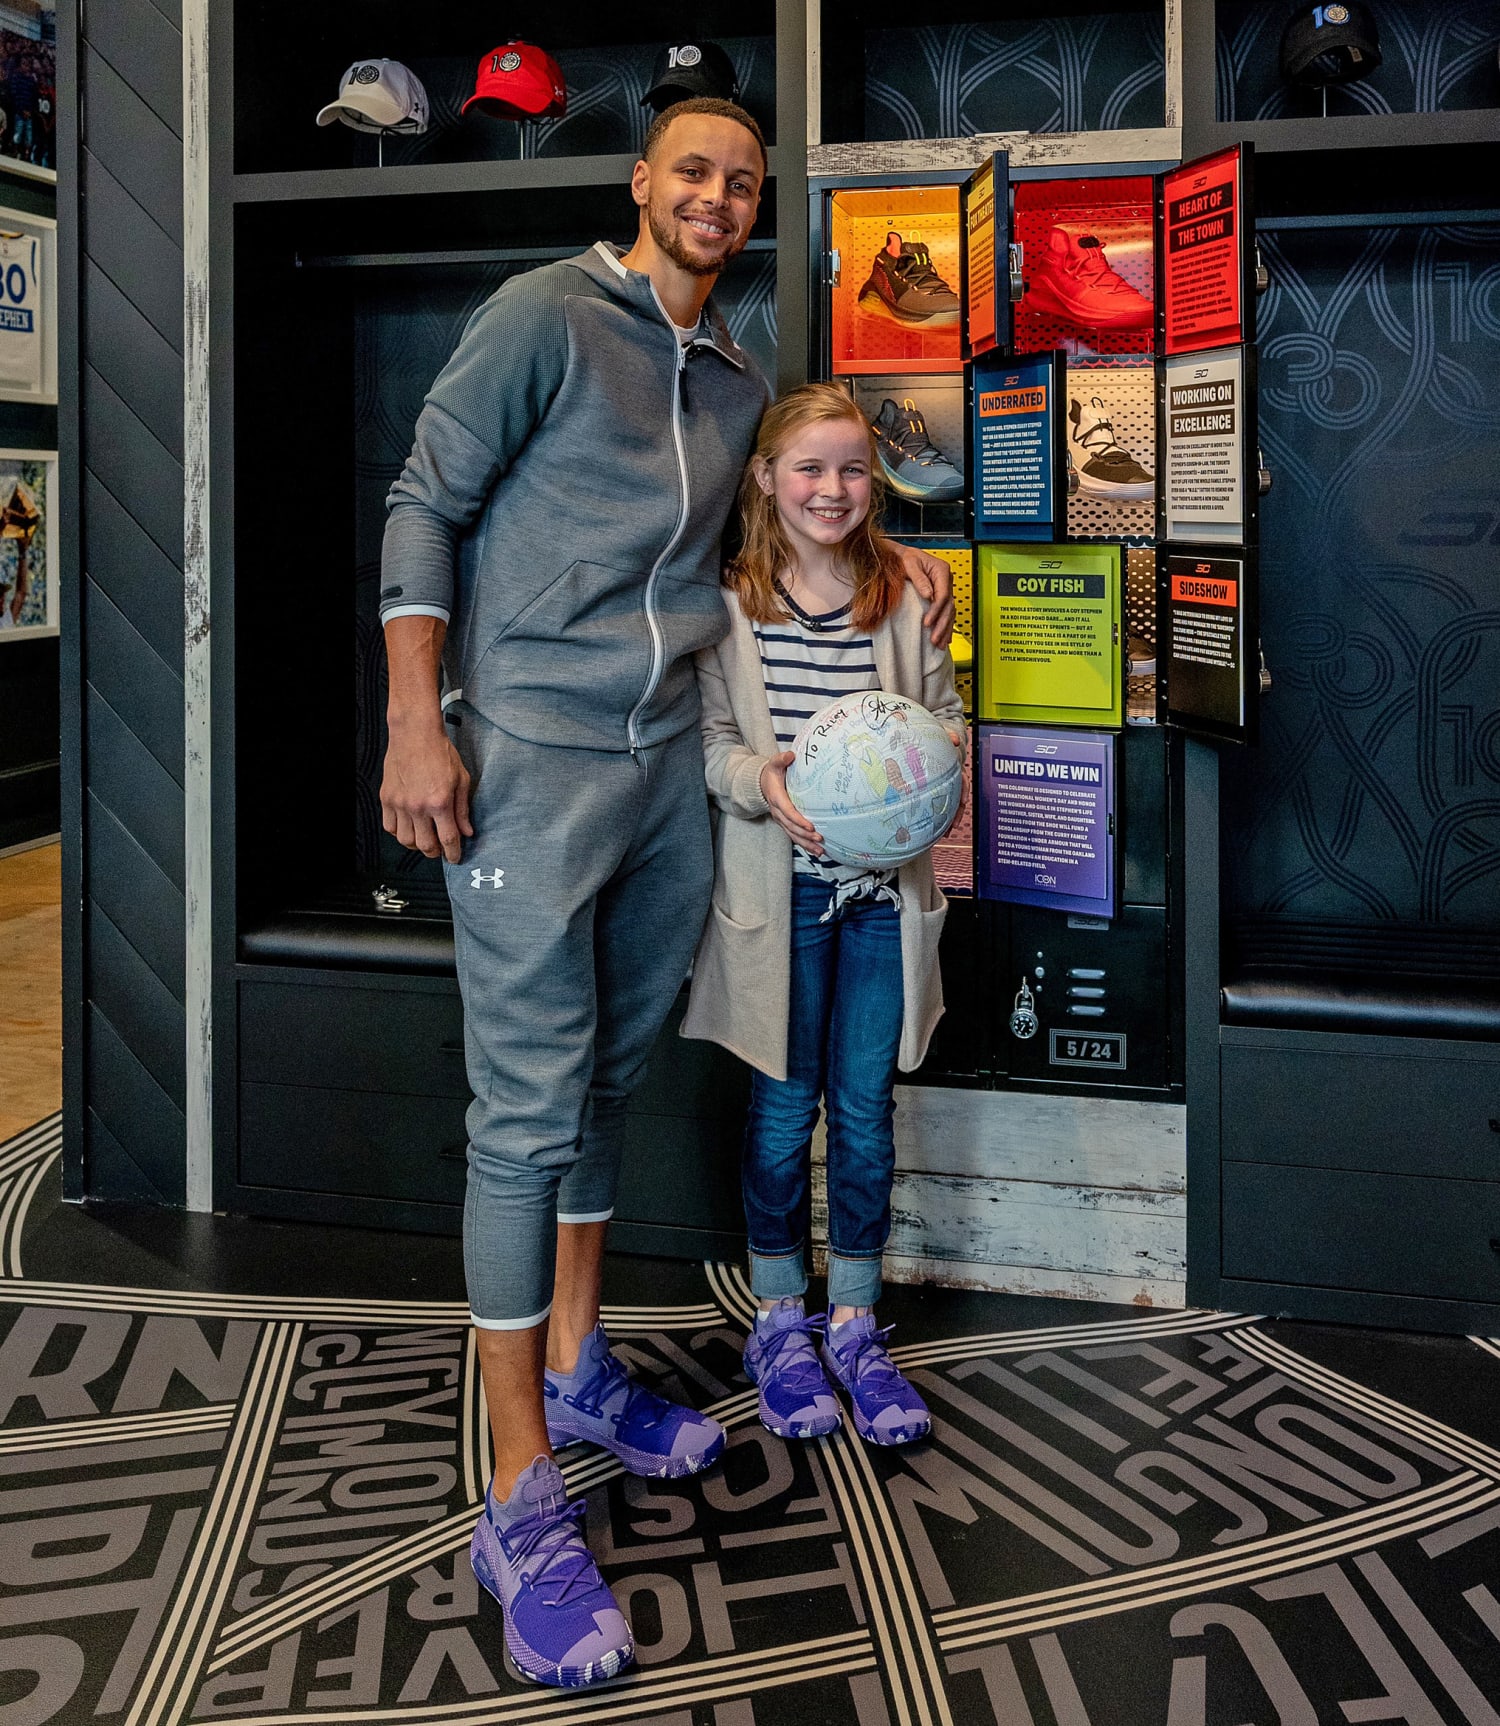 Steph Curry releases sneaker co-designed by girl who asked why only boys  sizes existed